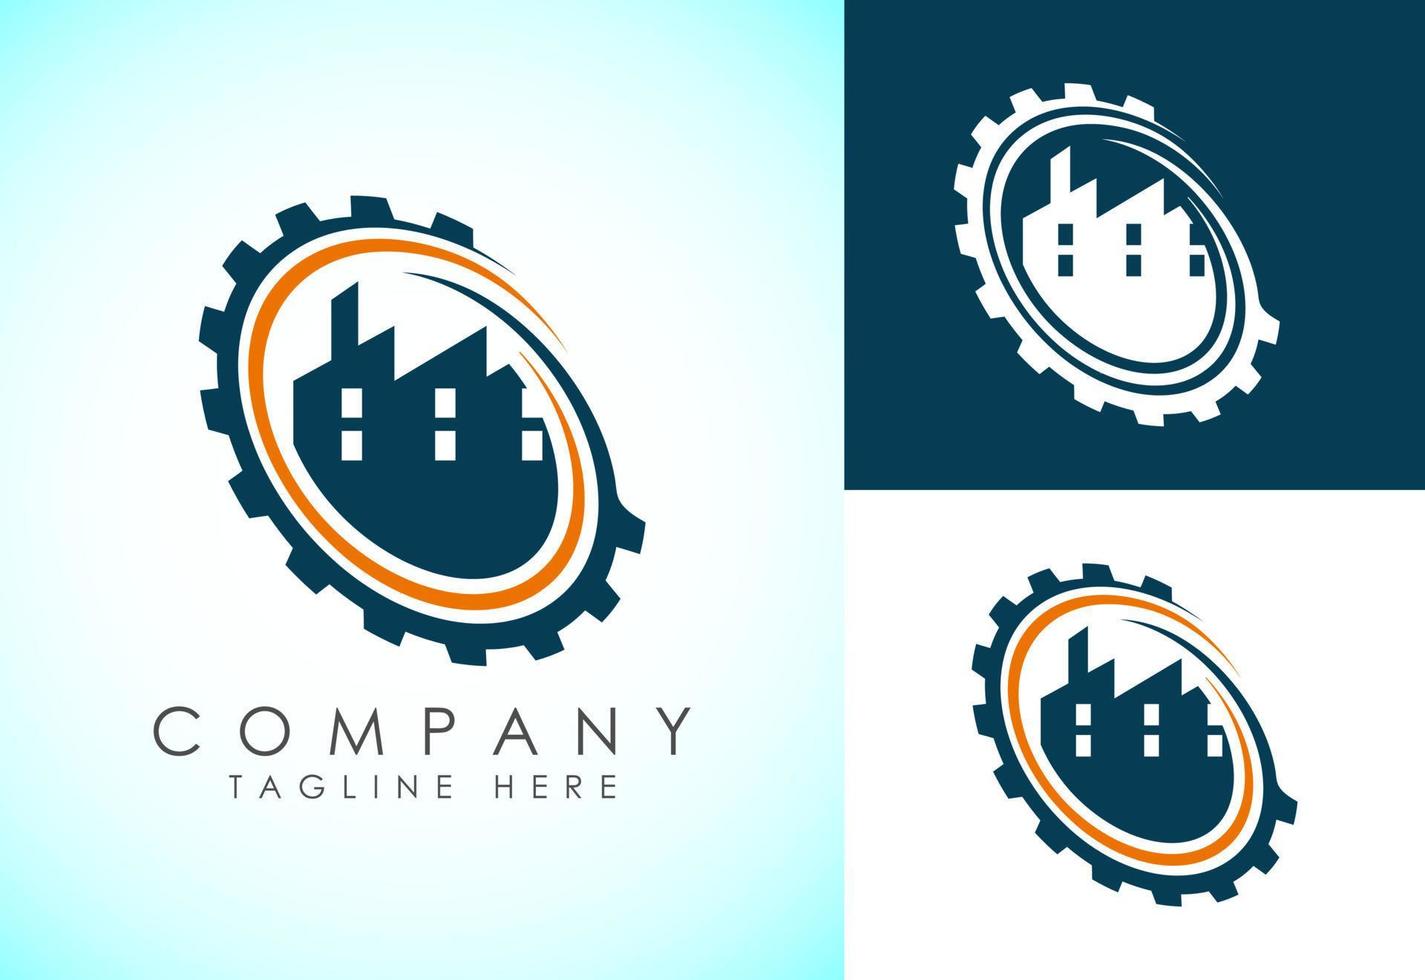 Industrial logo design concept. Corporate logo for production or service and maintenance business. vector